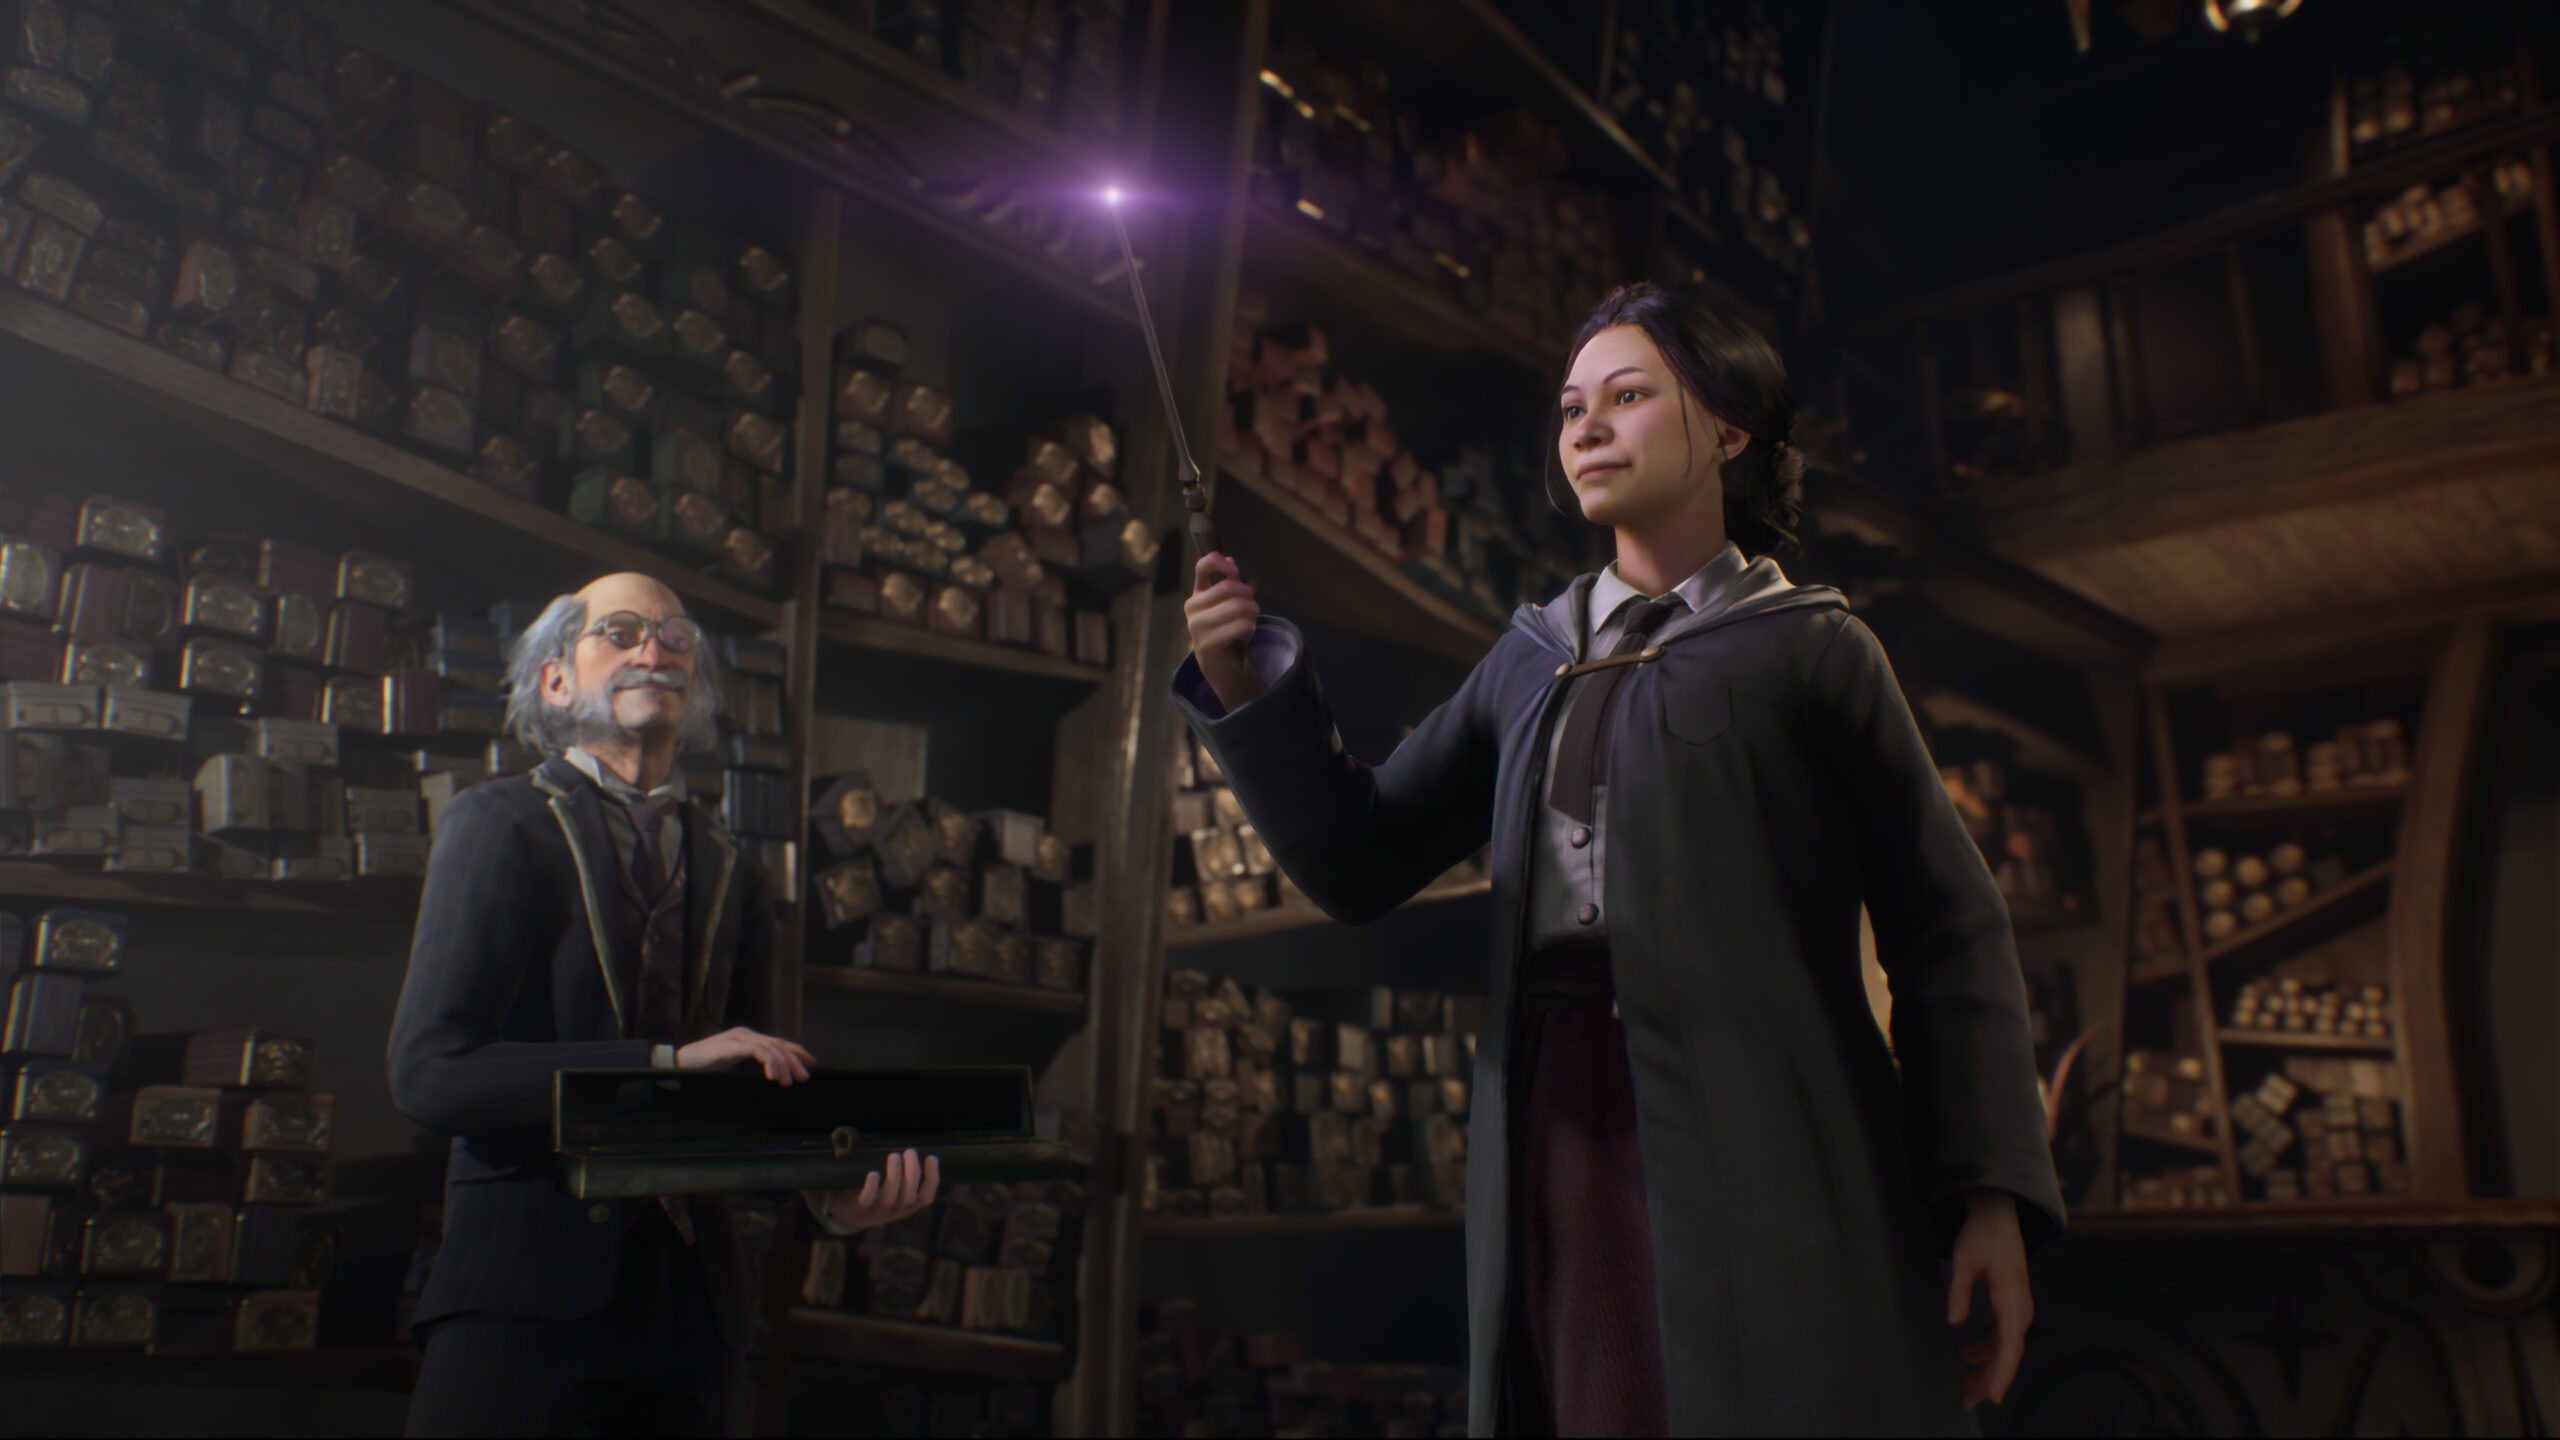 Finally, We Got To See Some Gameplay From Hogwarts Legacy